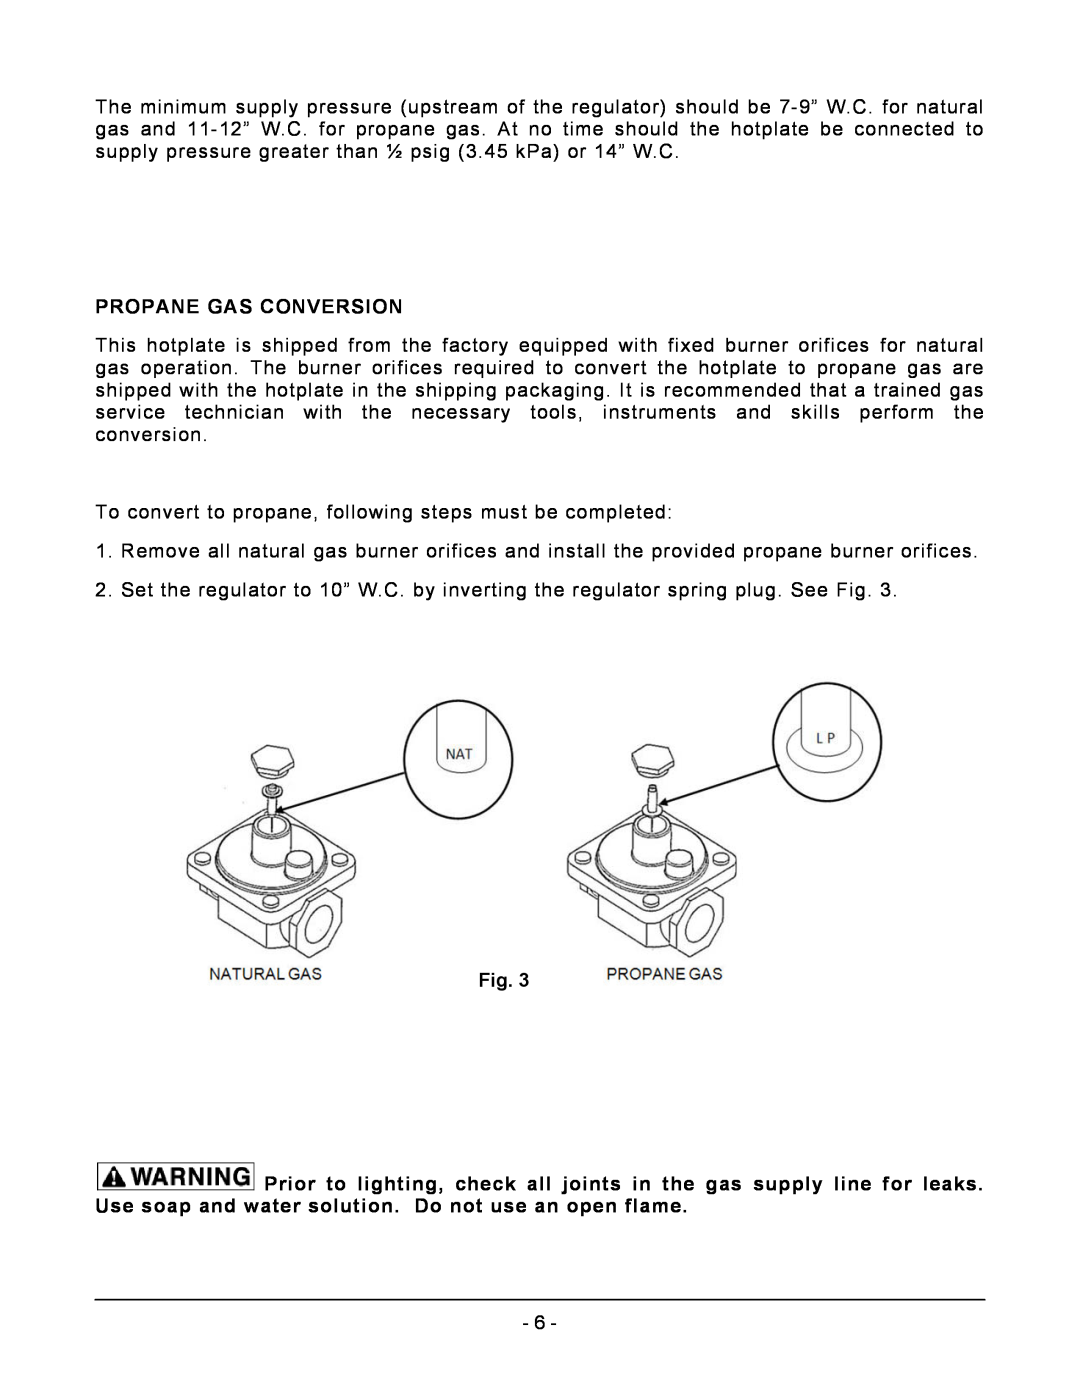 Vulcan-Hart VCRH12 operation manual Propane Gas Conversion, To convert to propane, following steps must be completed 